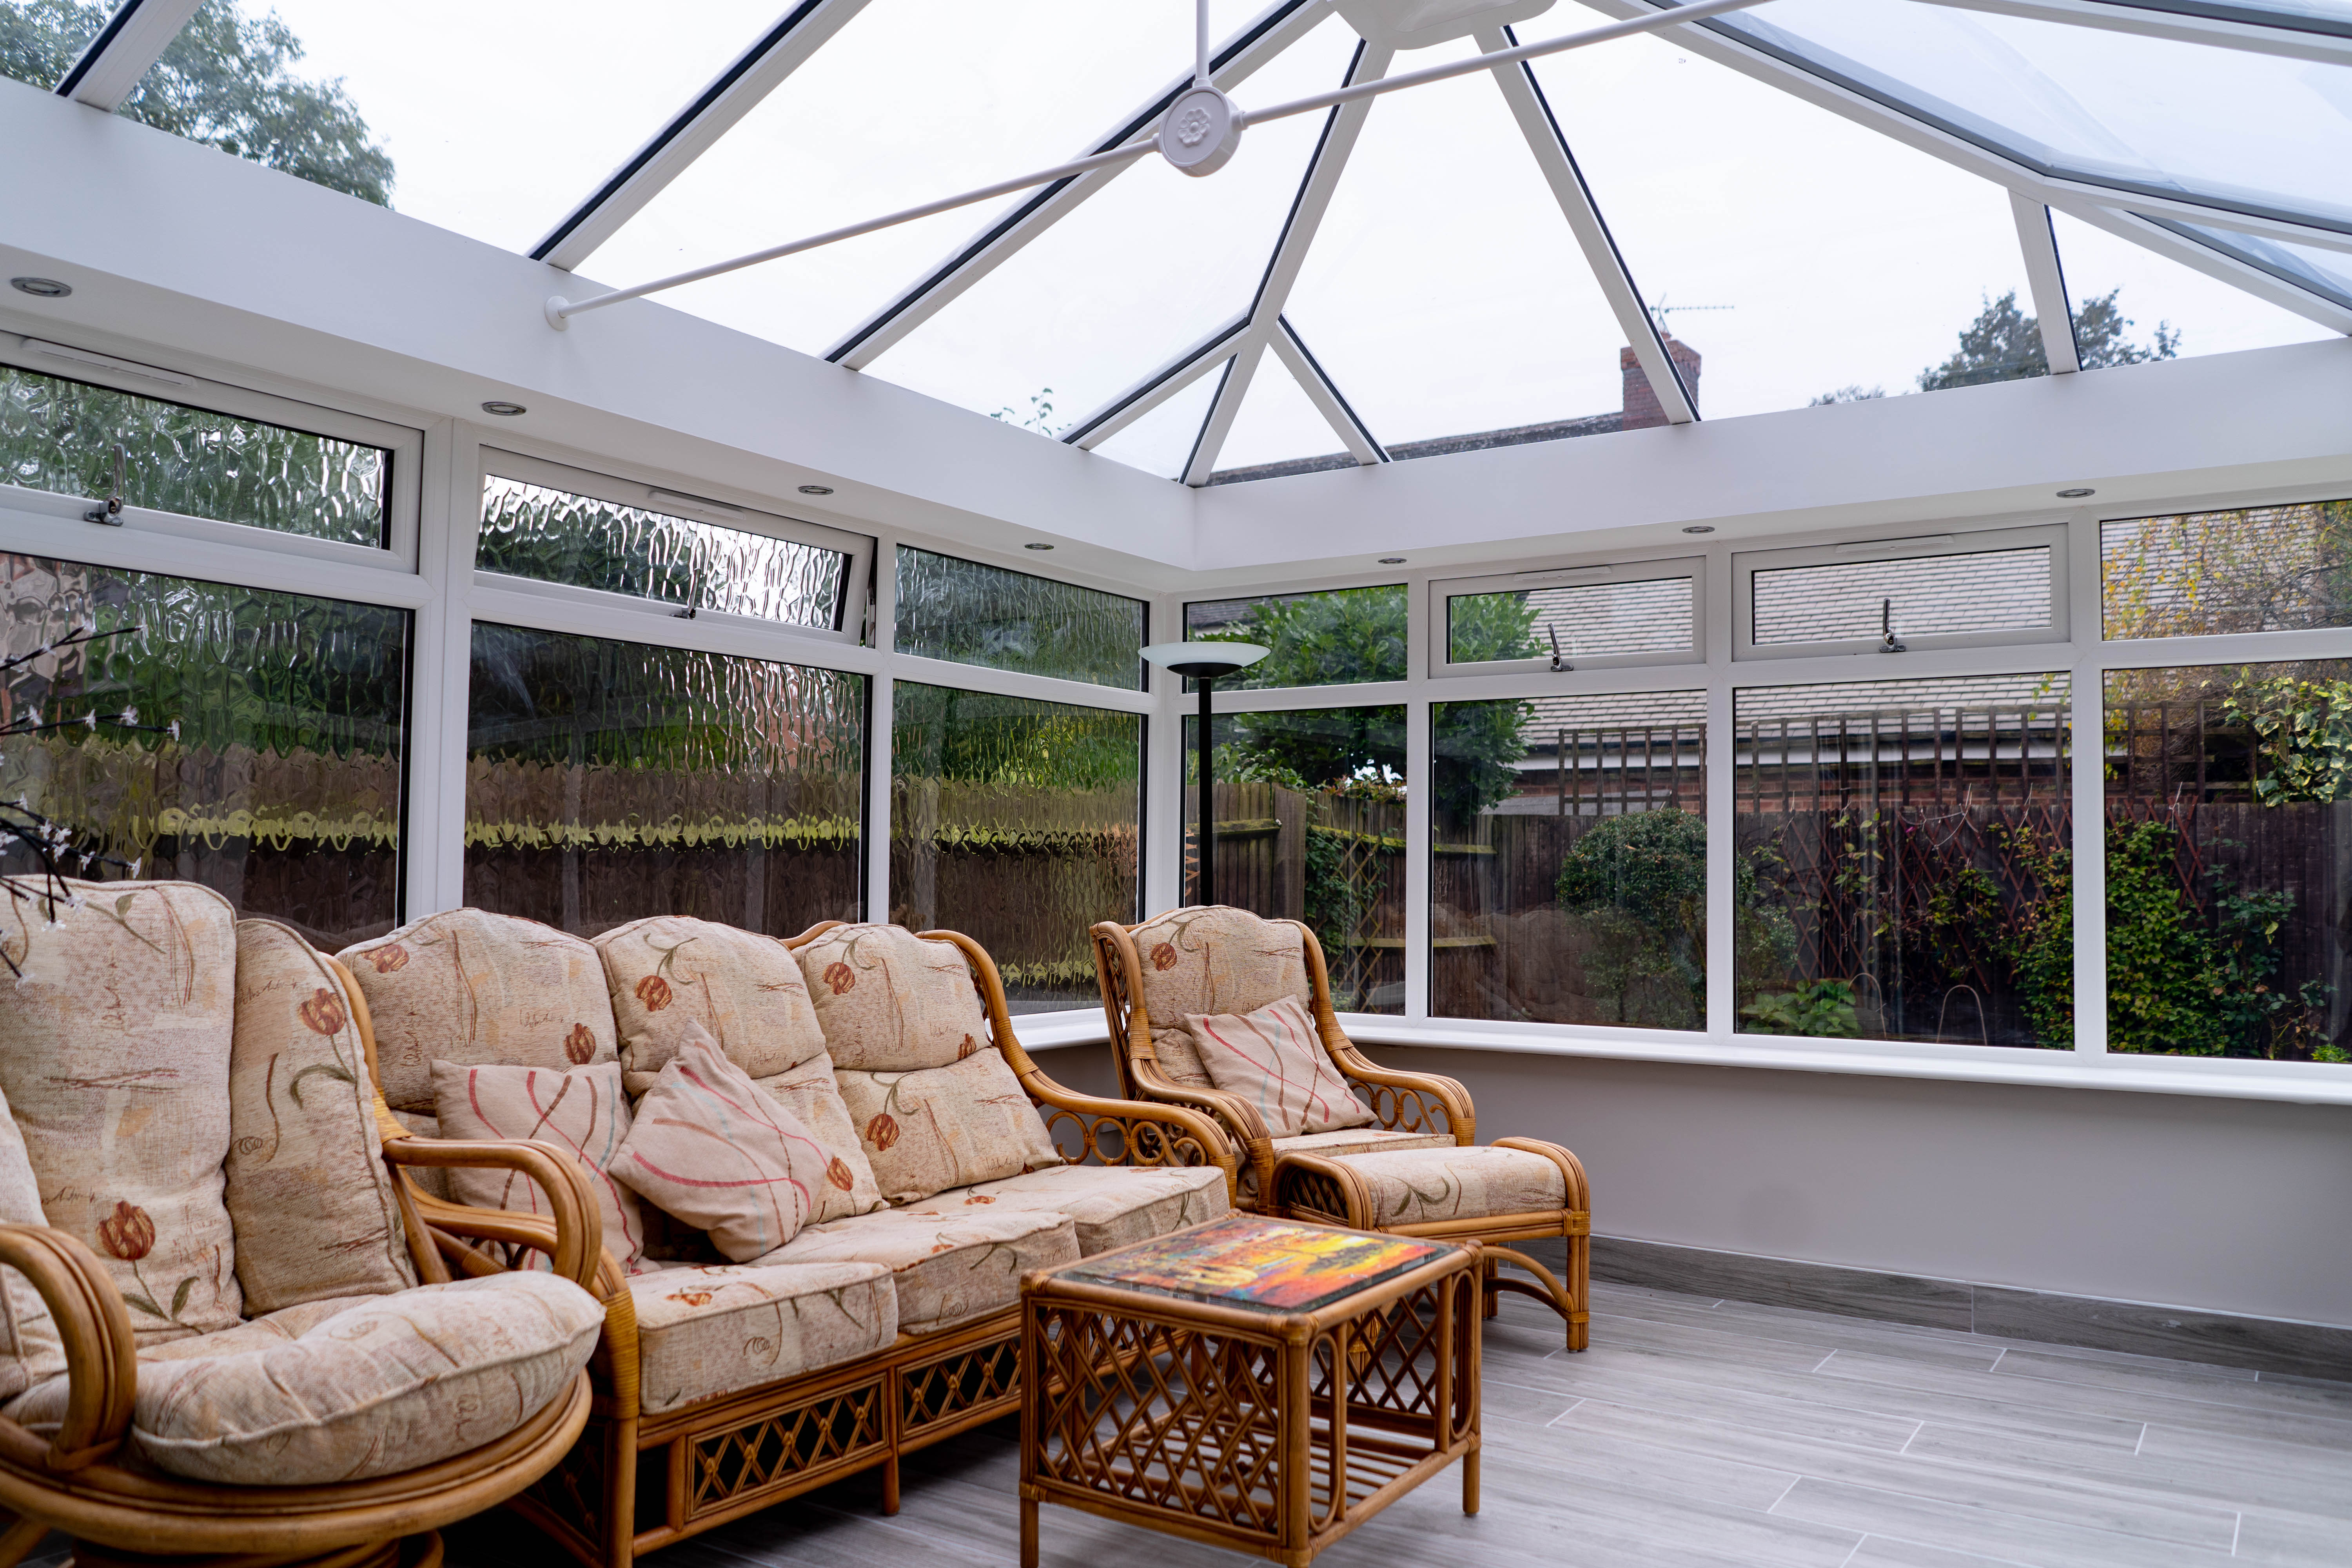 How To Clean The Inside Of A Conservatory Roof? 